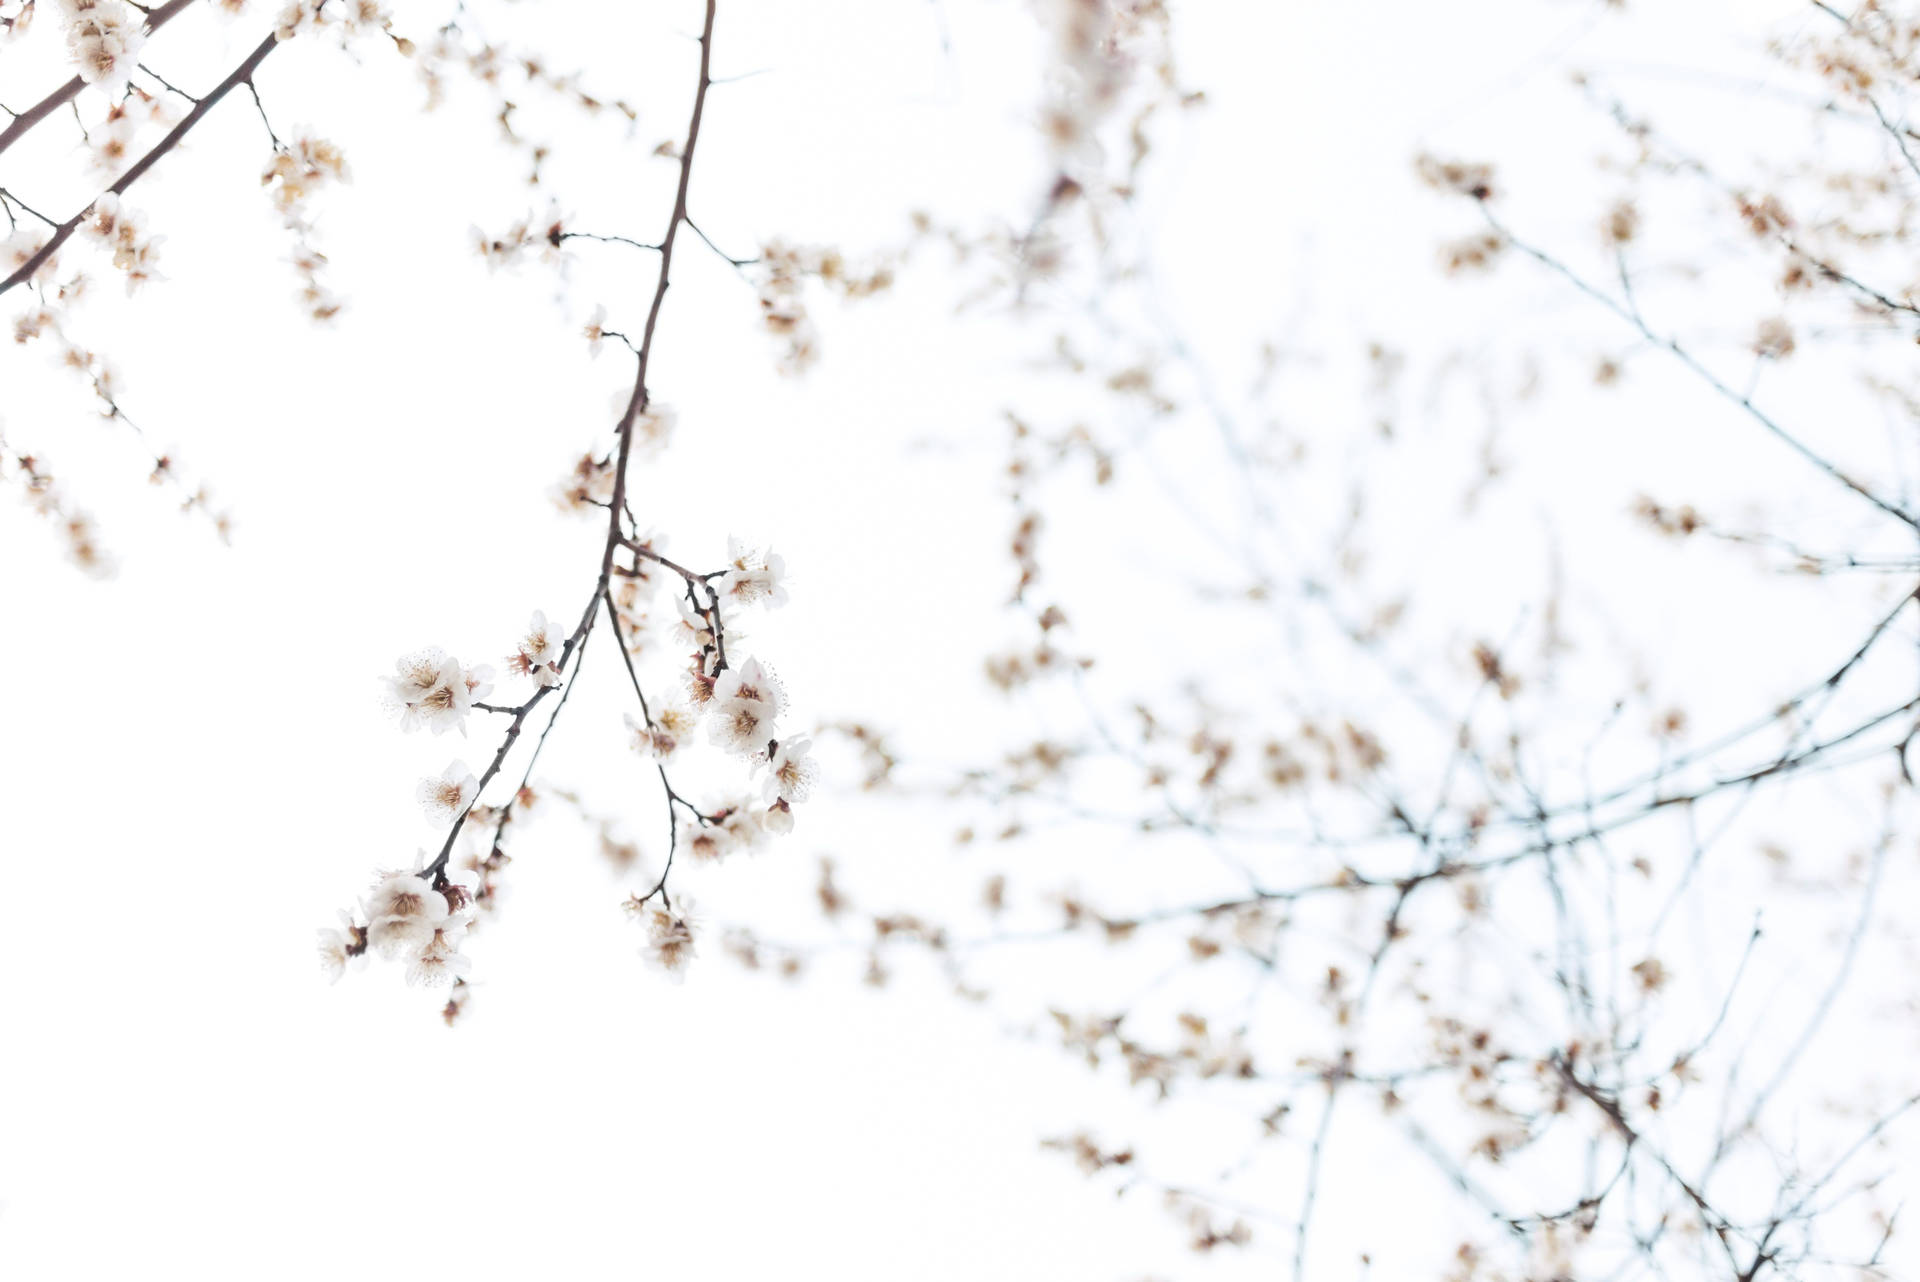 Embrace the simplicity and beauty of spring with a minimalist approach. Wallpaper